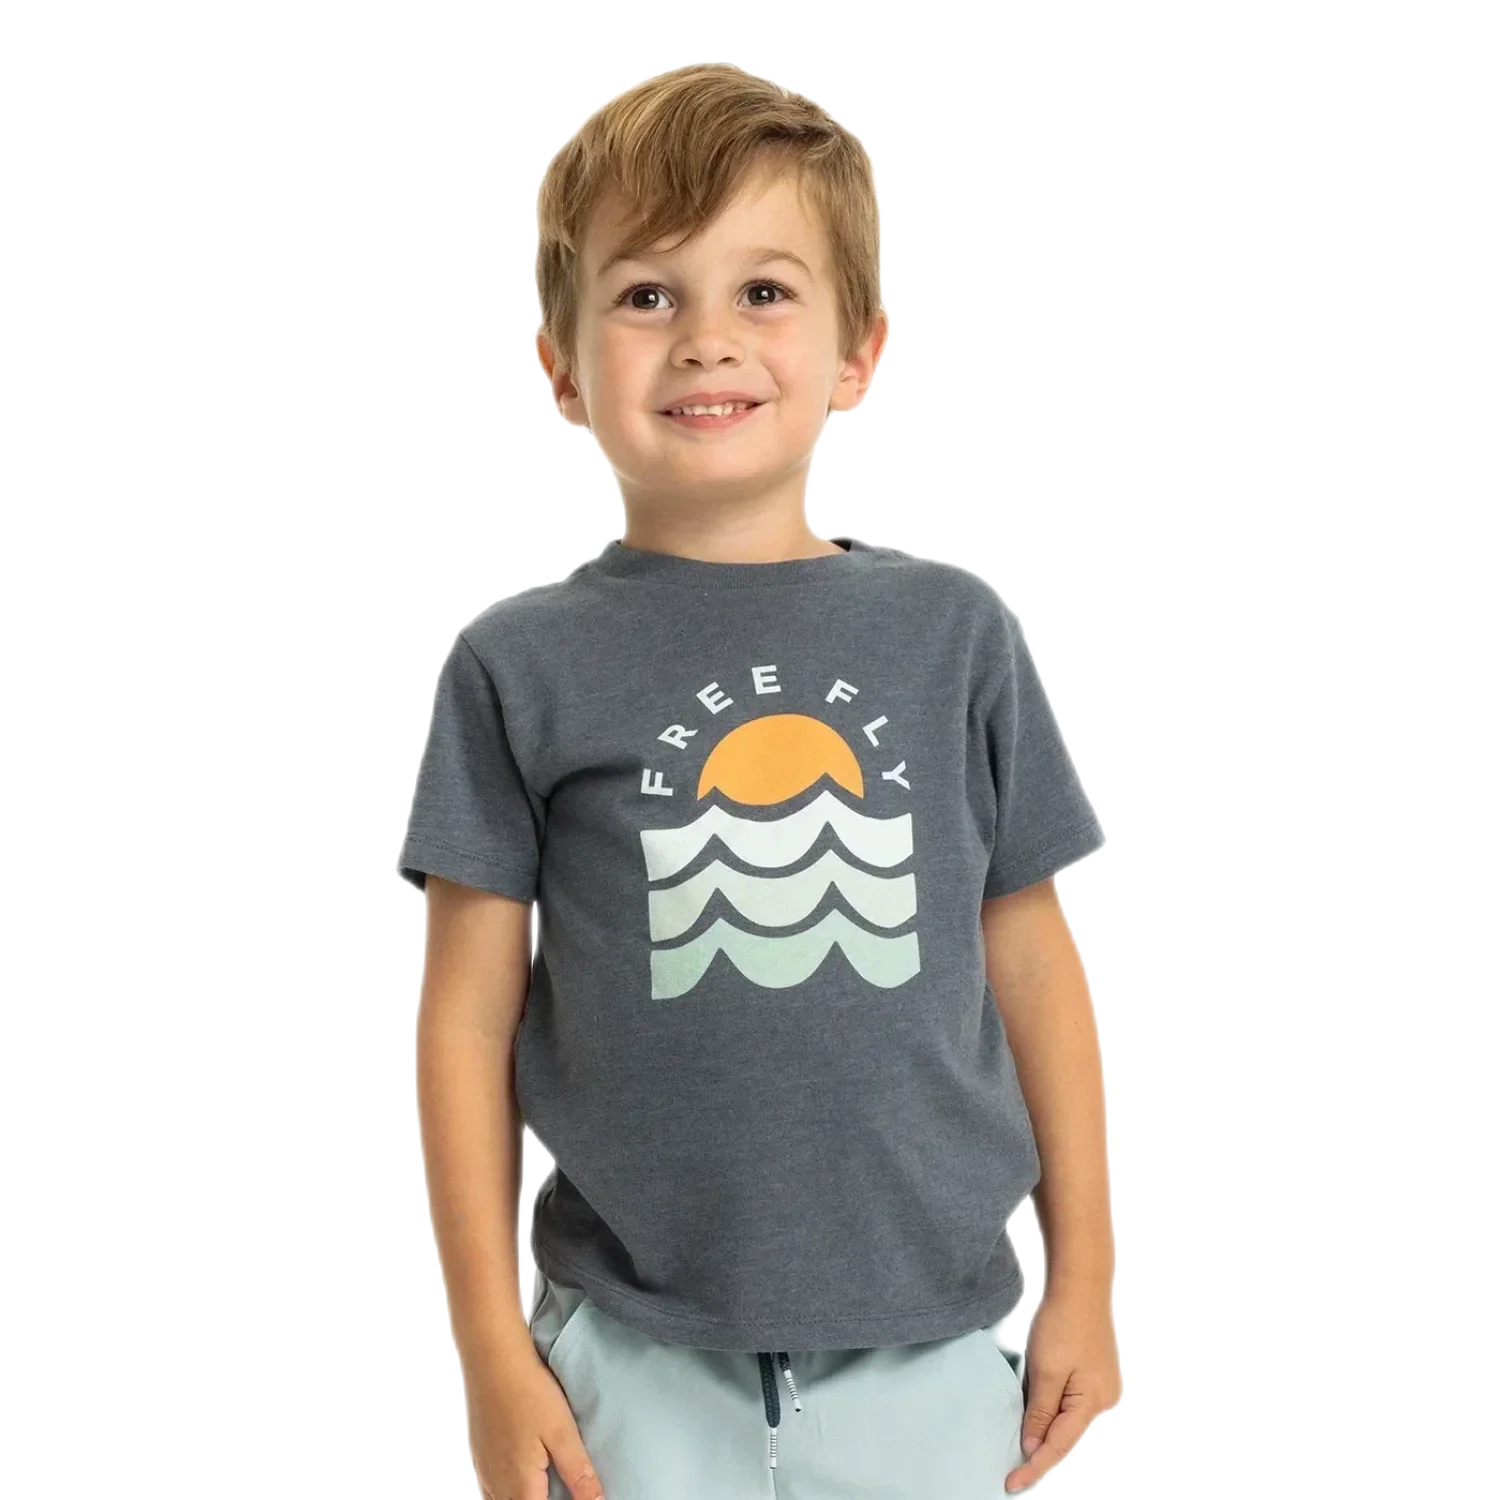 Free Fly Apparel 22. KIDS - INFANTTODDLER Toddler Perfect Day Tee HEATHER STORM CLOUD